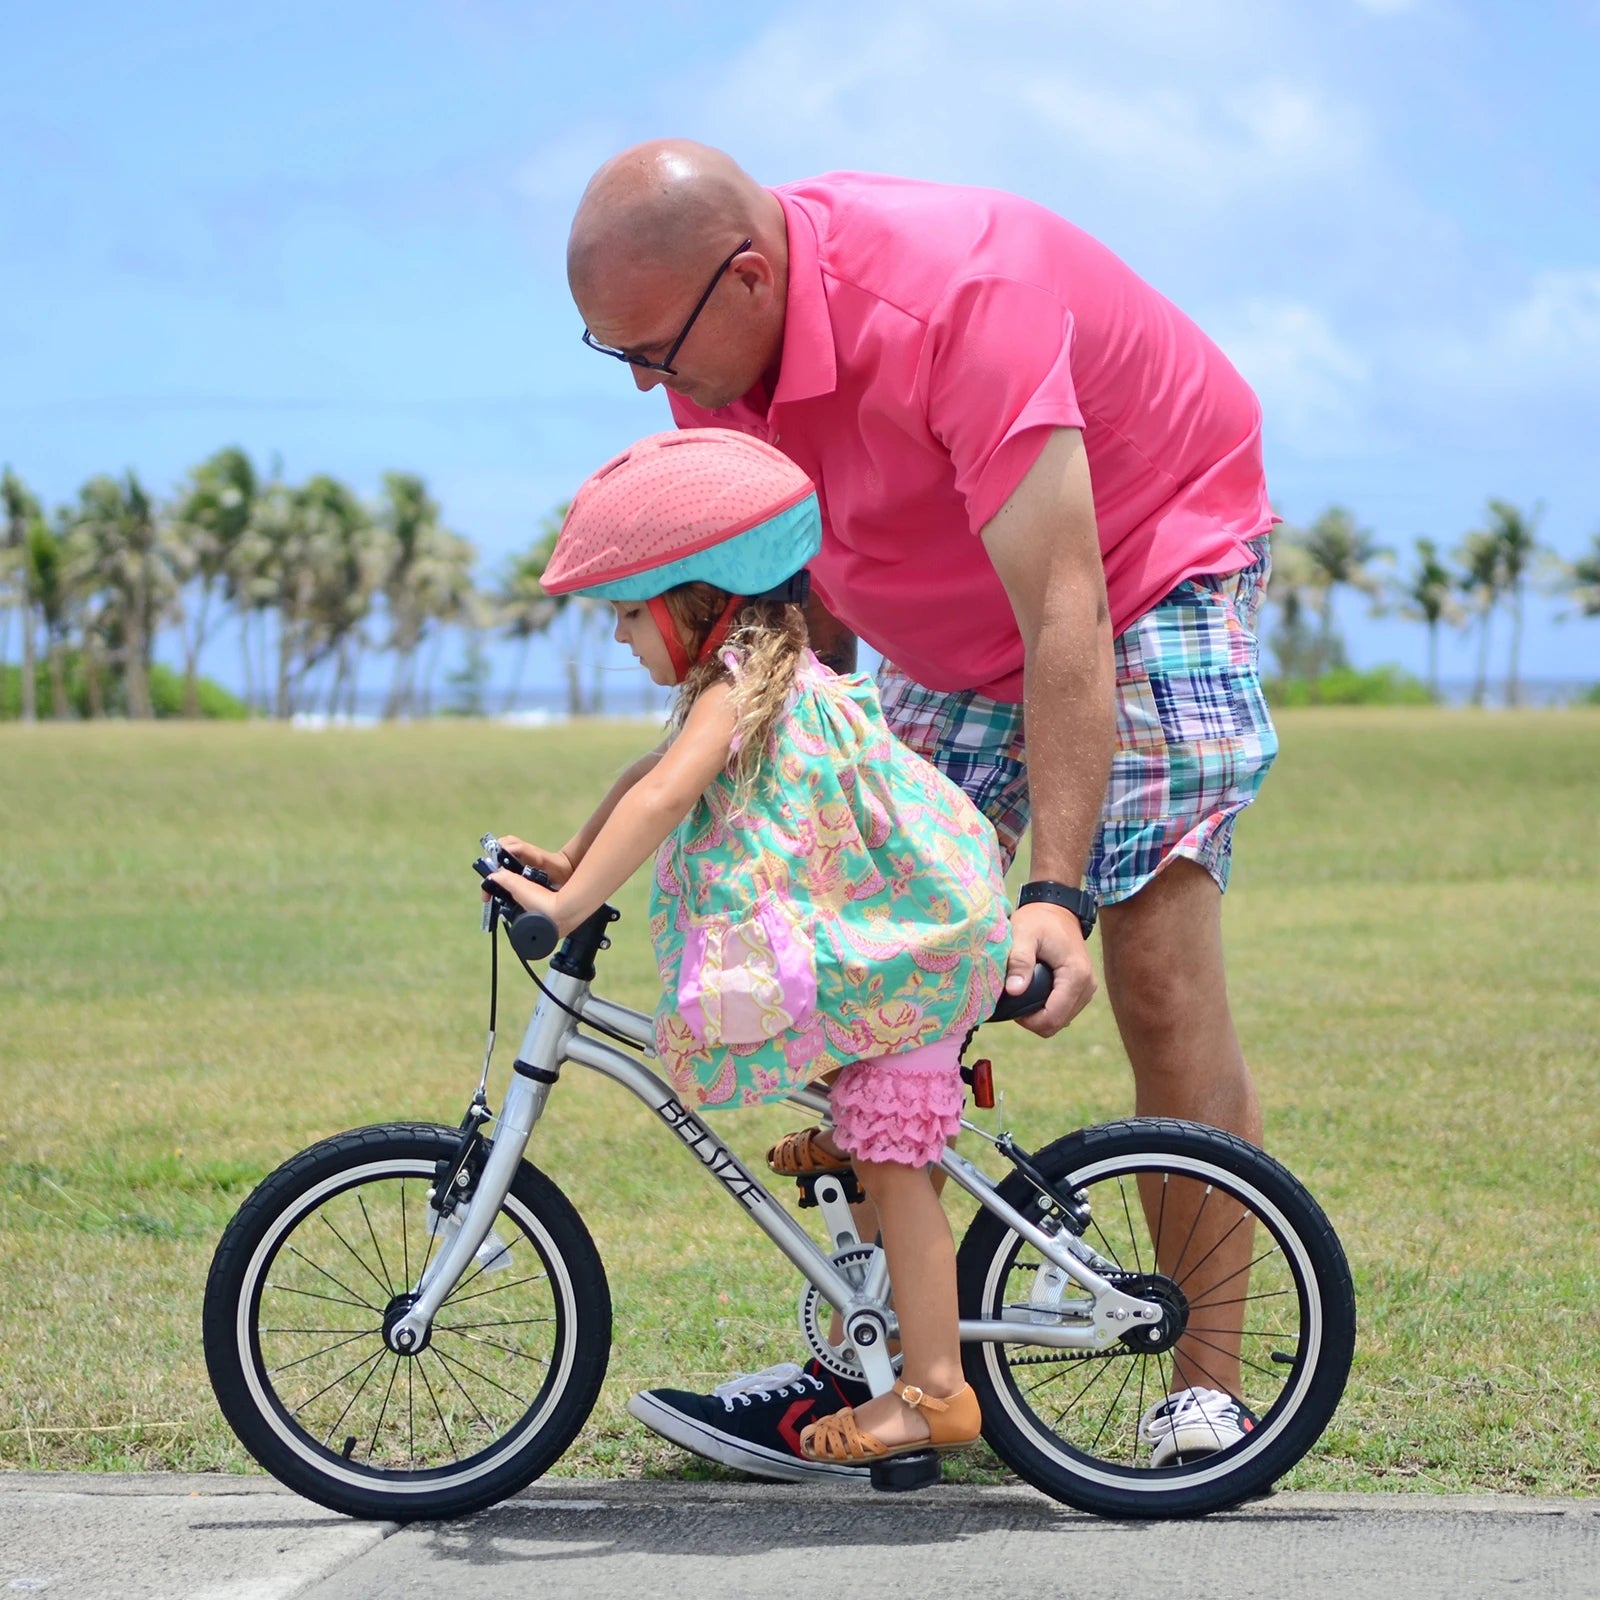 4 Reasons Why Belt-Drive Bikes Are Better for Your Child